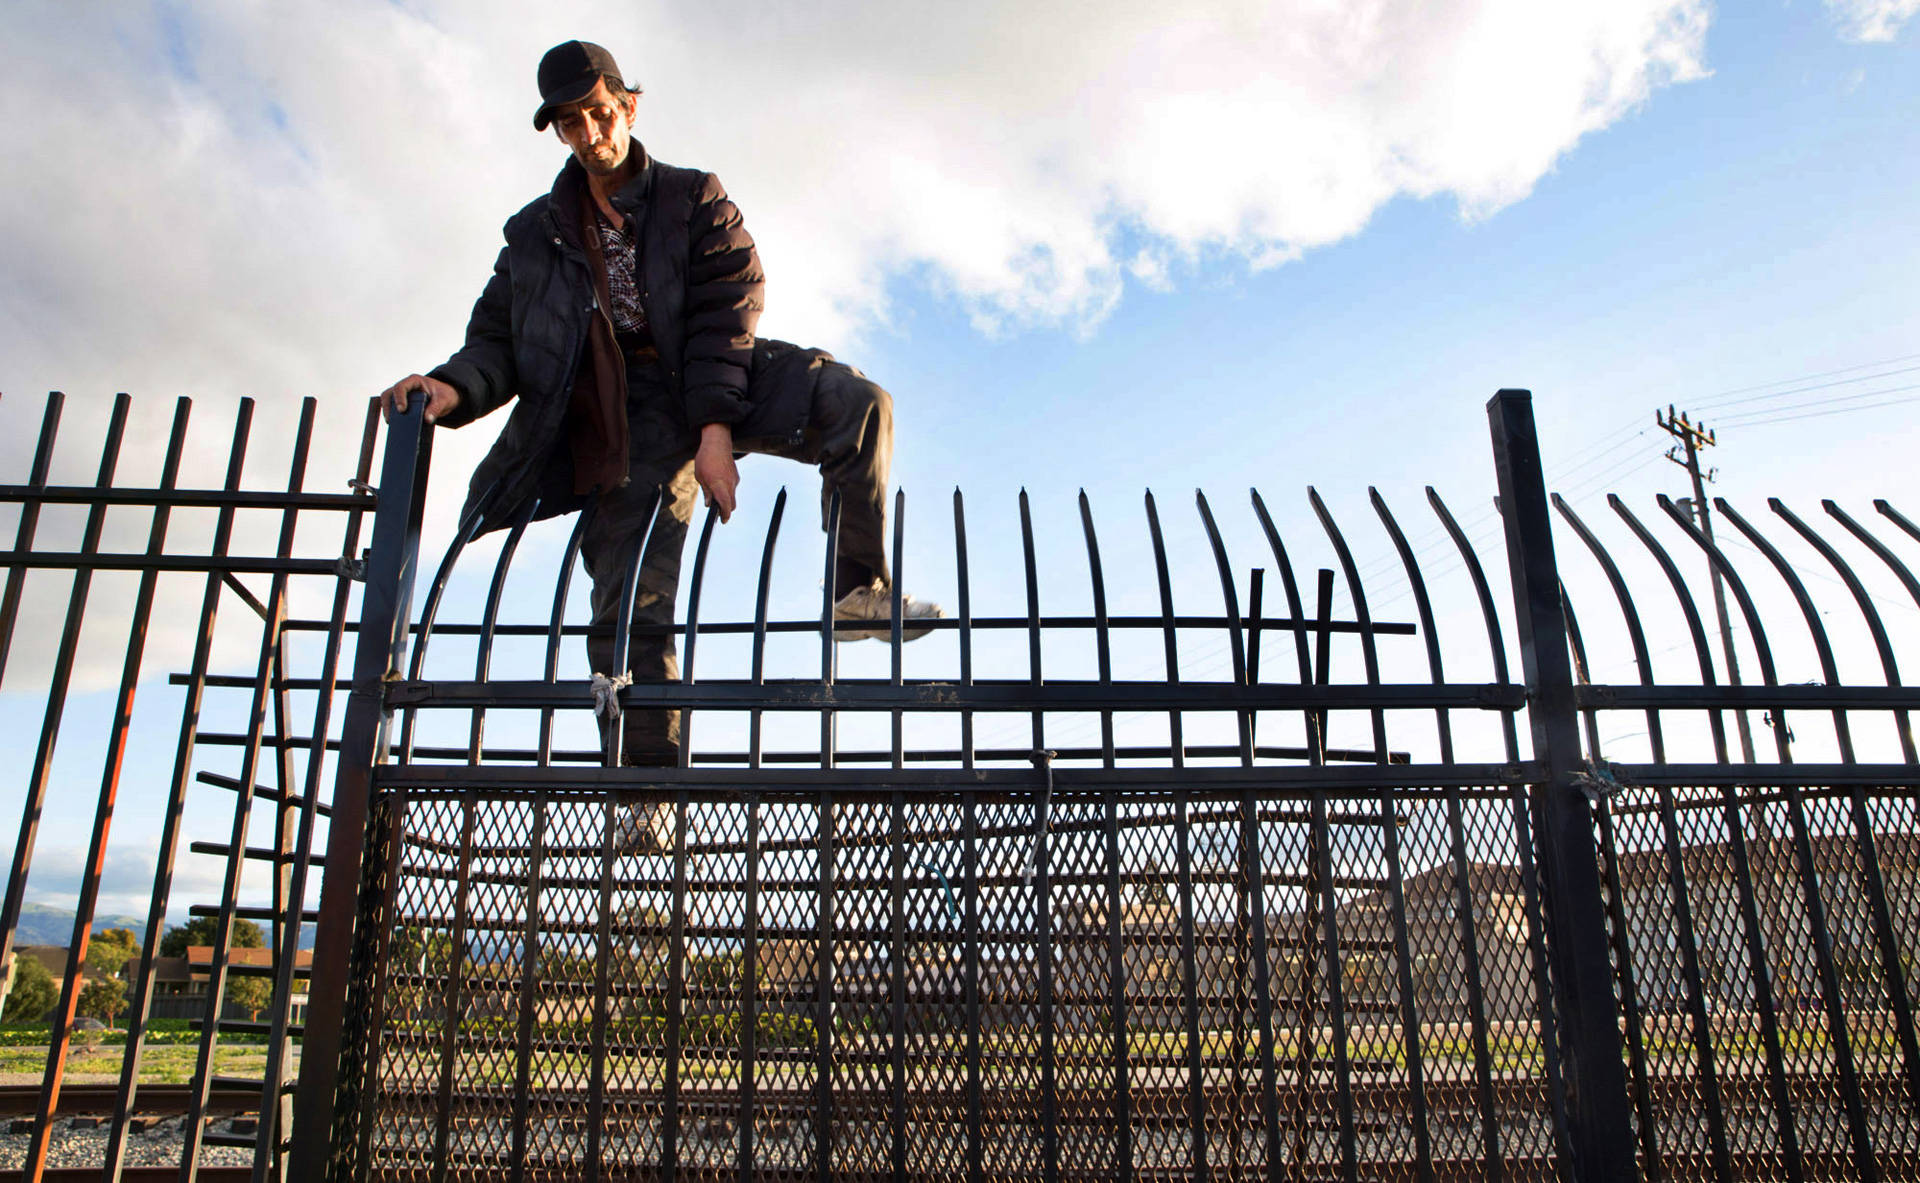 A man climbs over a fence bordering the railroad tracks that separate Chinatown from the rest of downtown Salinas. It's a common route for many Chinatown residents since accessible walking routes in and out of the neighborhood are scarce. Sarah Craig/KQED